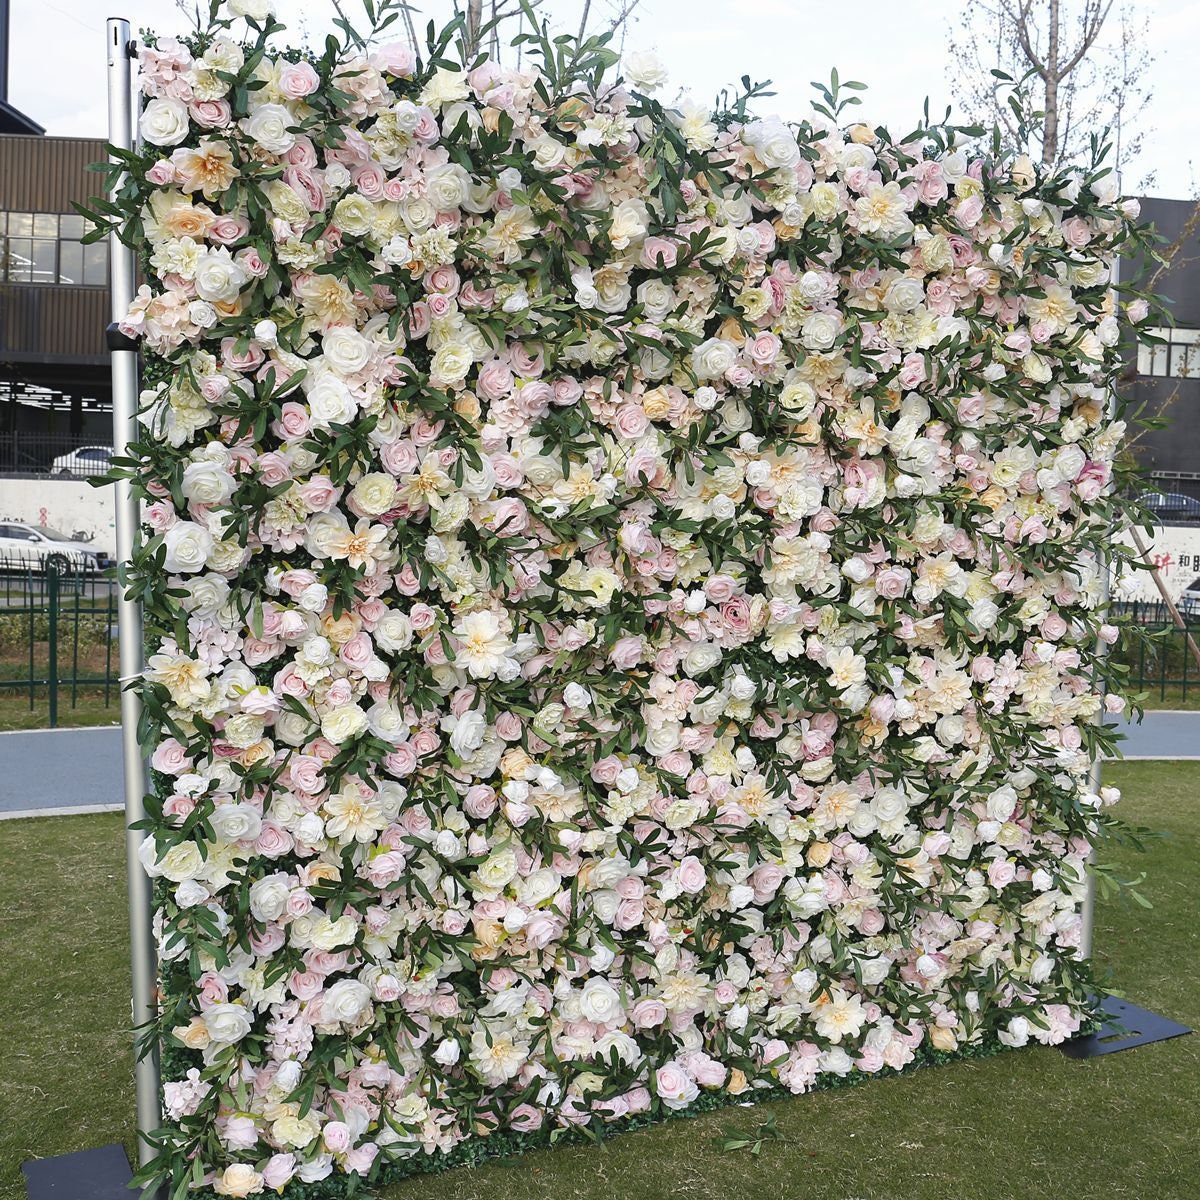 New Arrival Artifical Flower Wall For Wedding Arrangement Event Salon Party Photography Backdrop Fabric Rolling Up Curtain Fabric Cloth